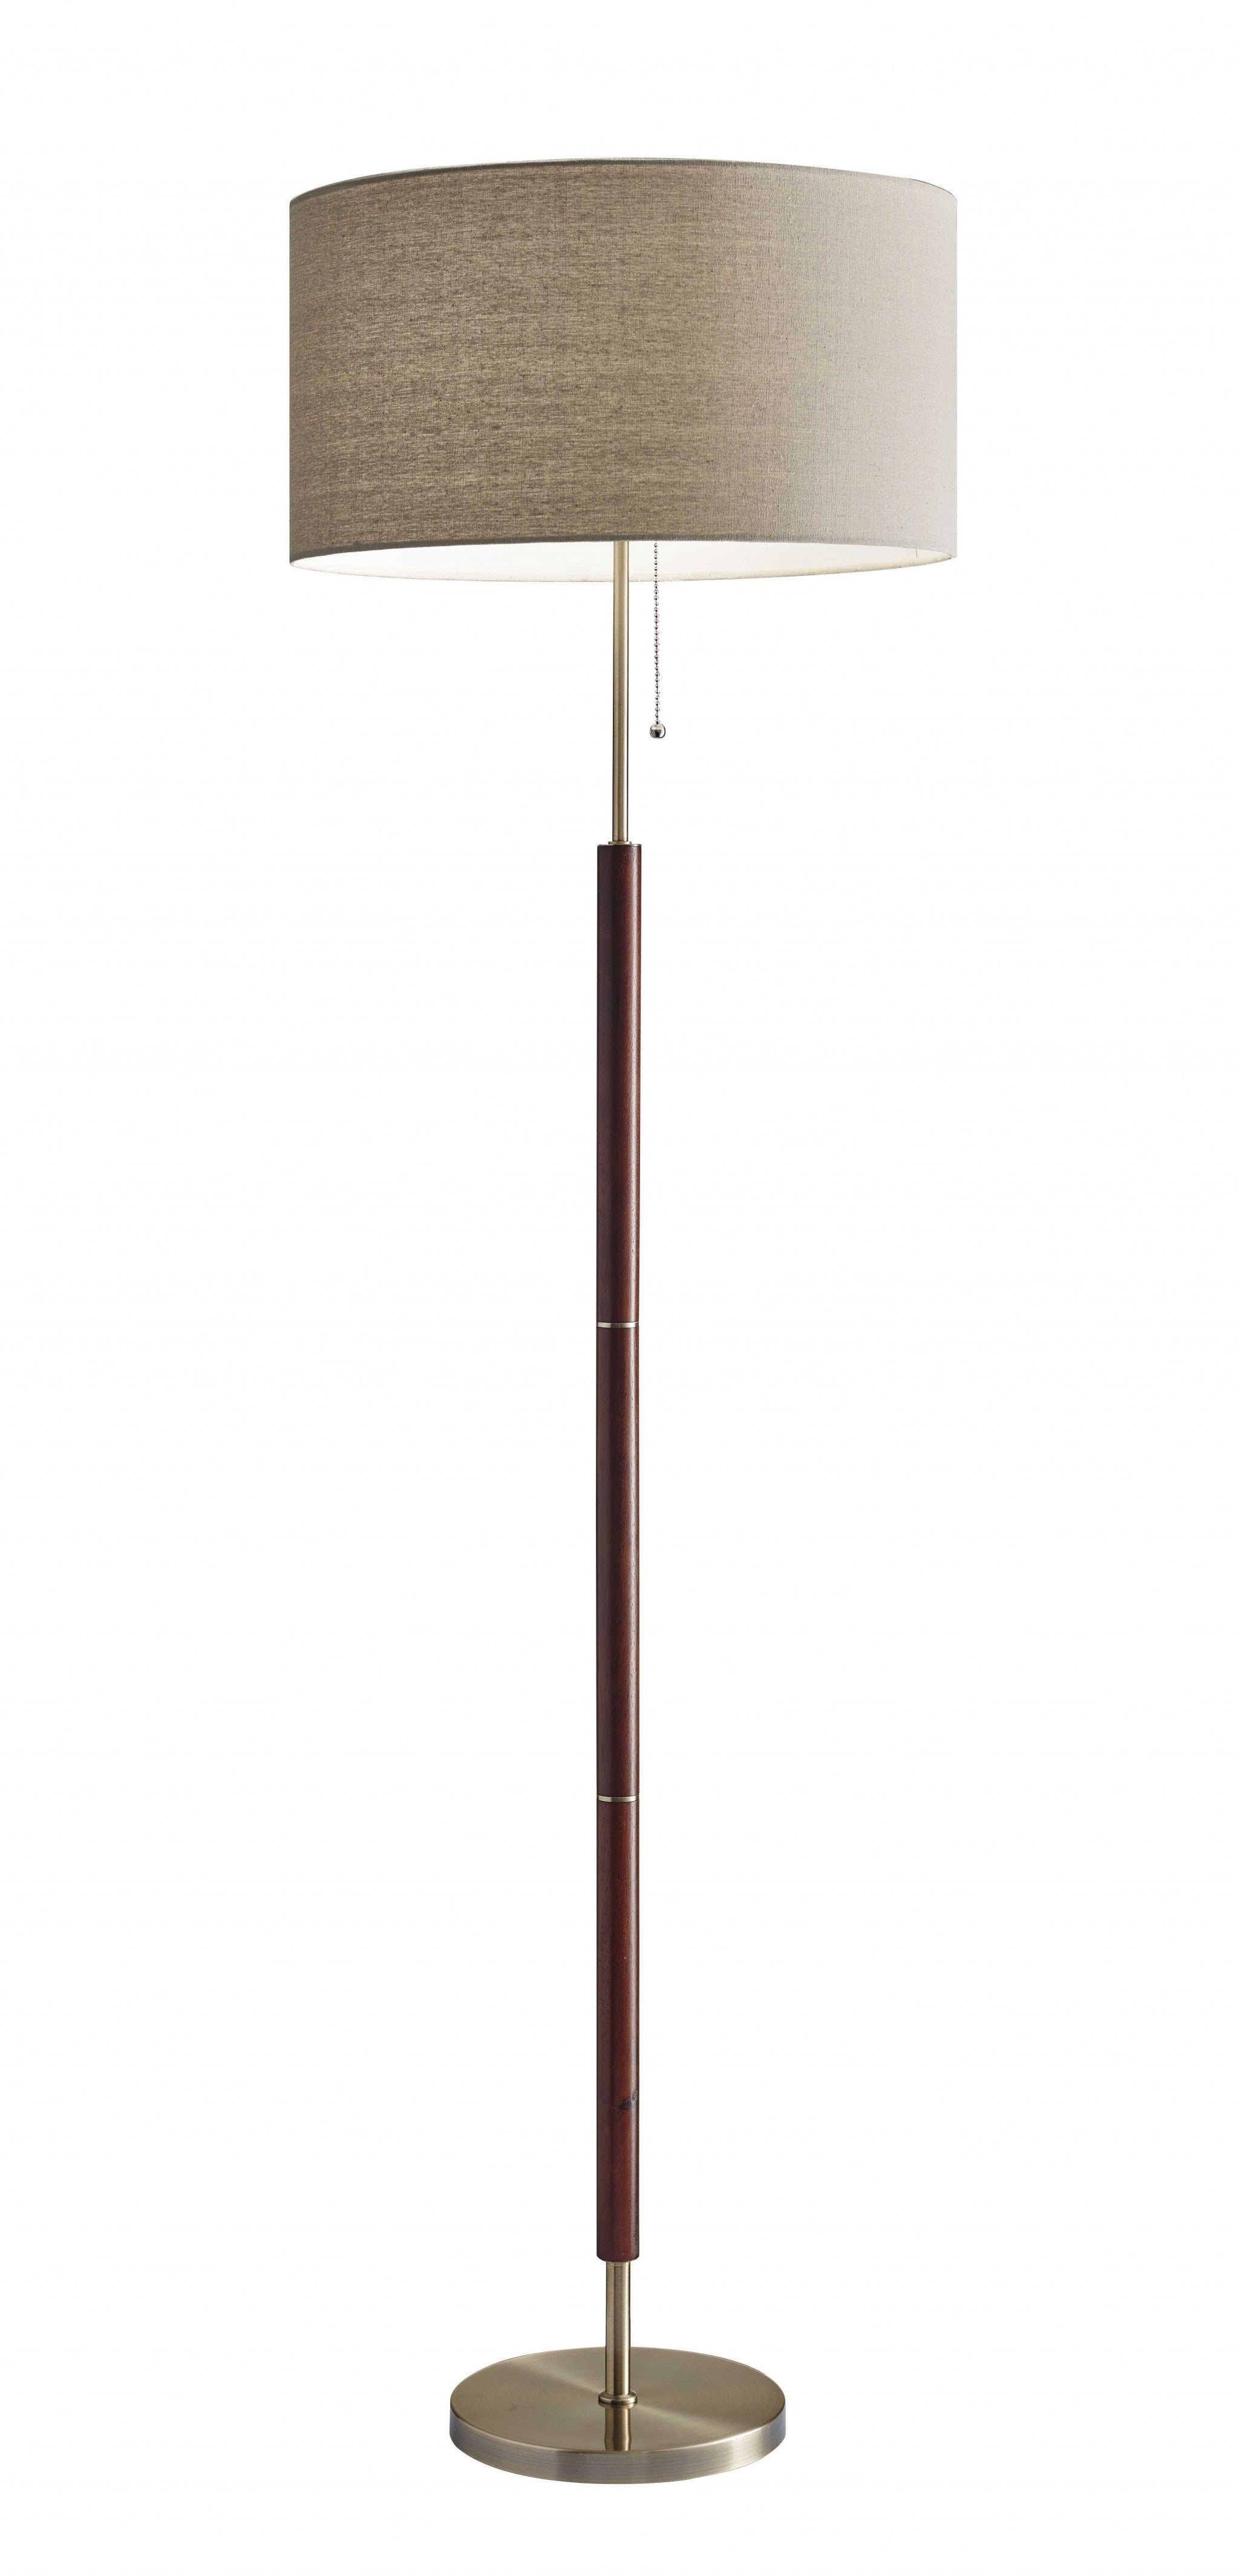 66" Traditional Shaped Floor Lamp With Brown Drum Shade